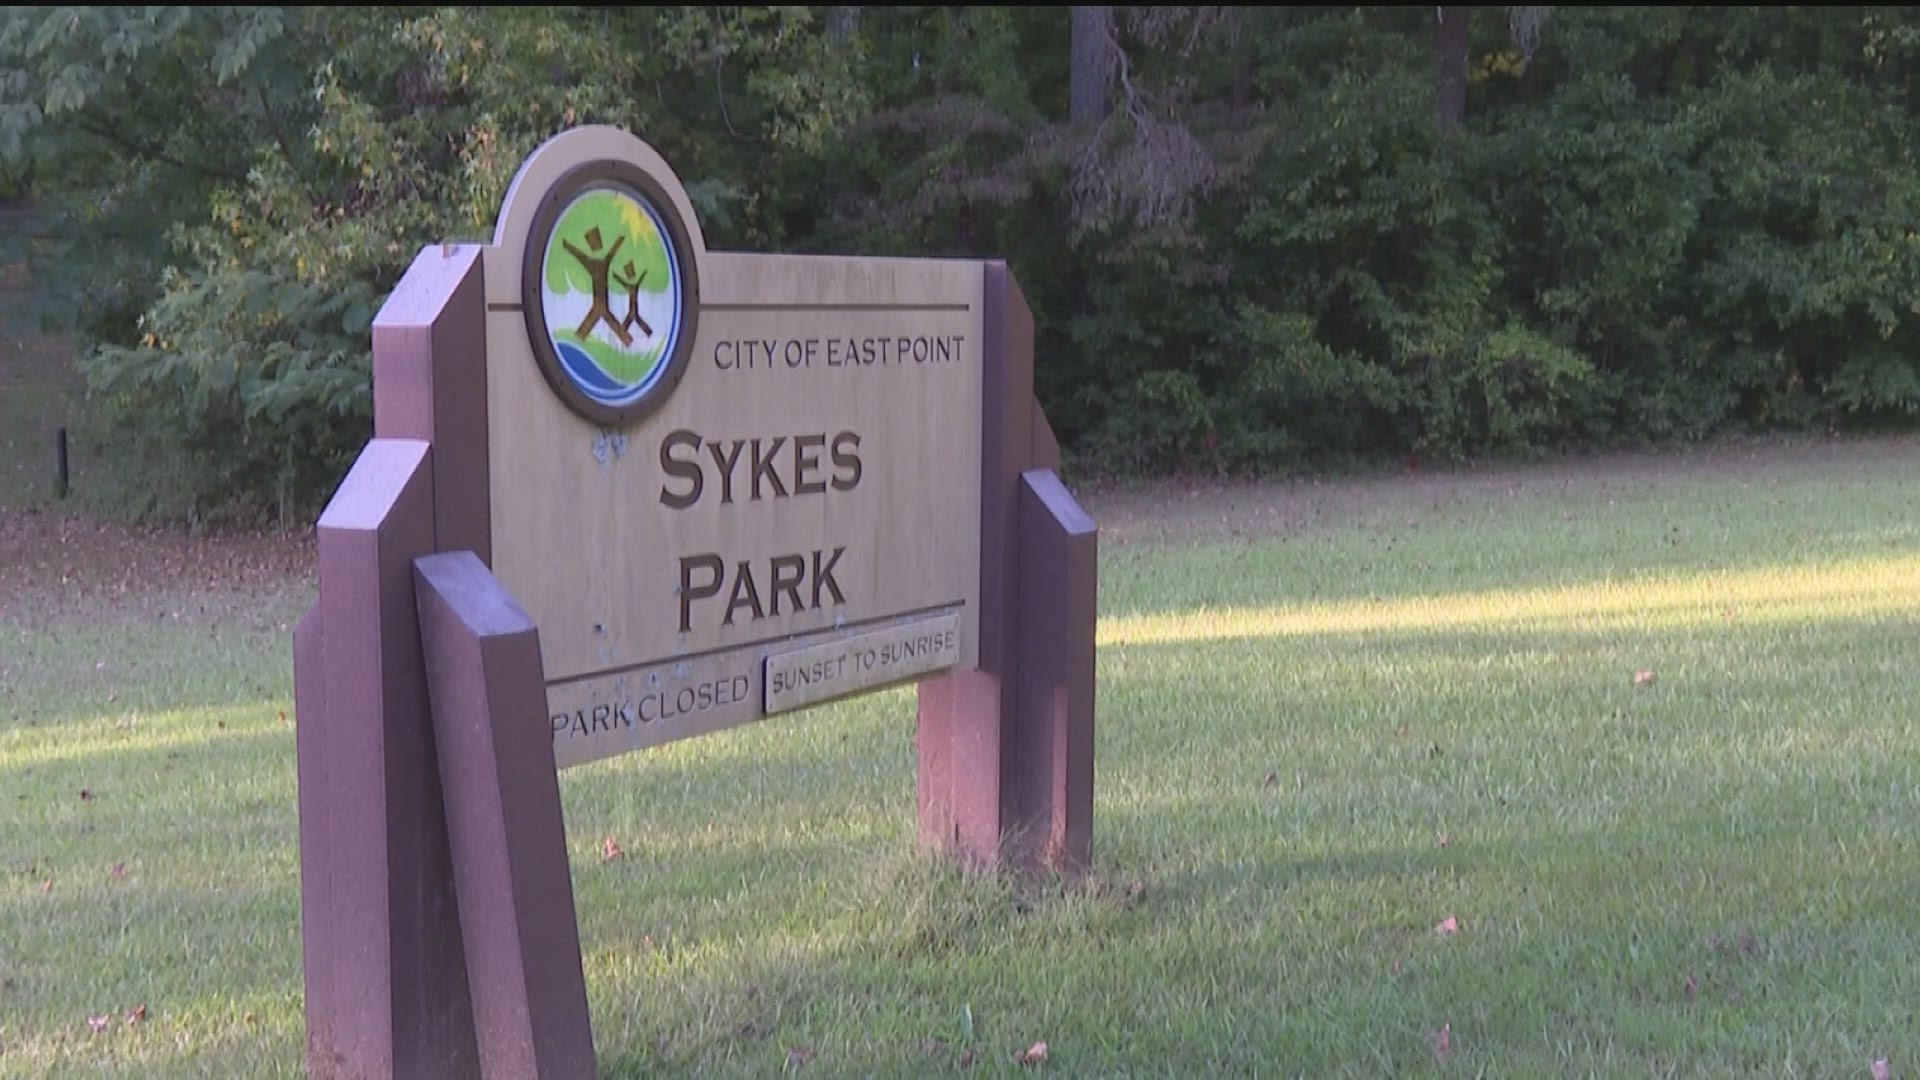 There are new details about sting operations underway at the Sykes Park in East Point.